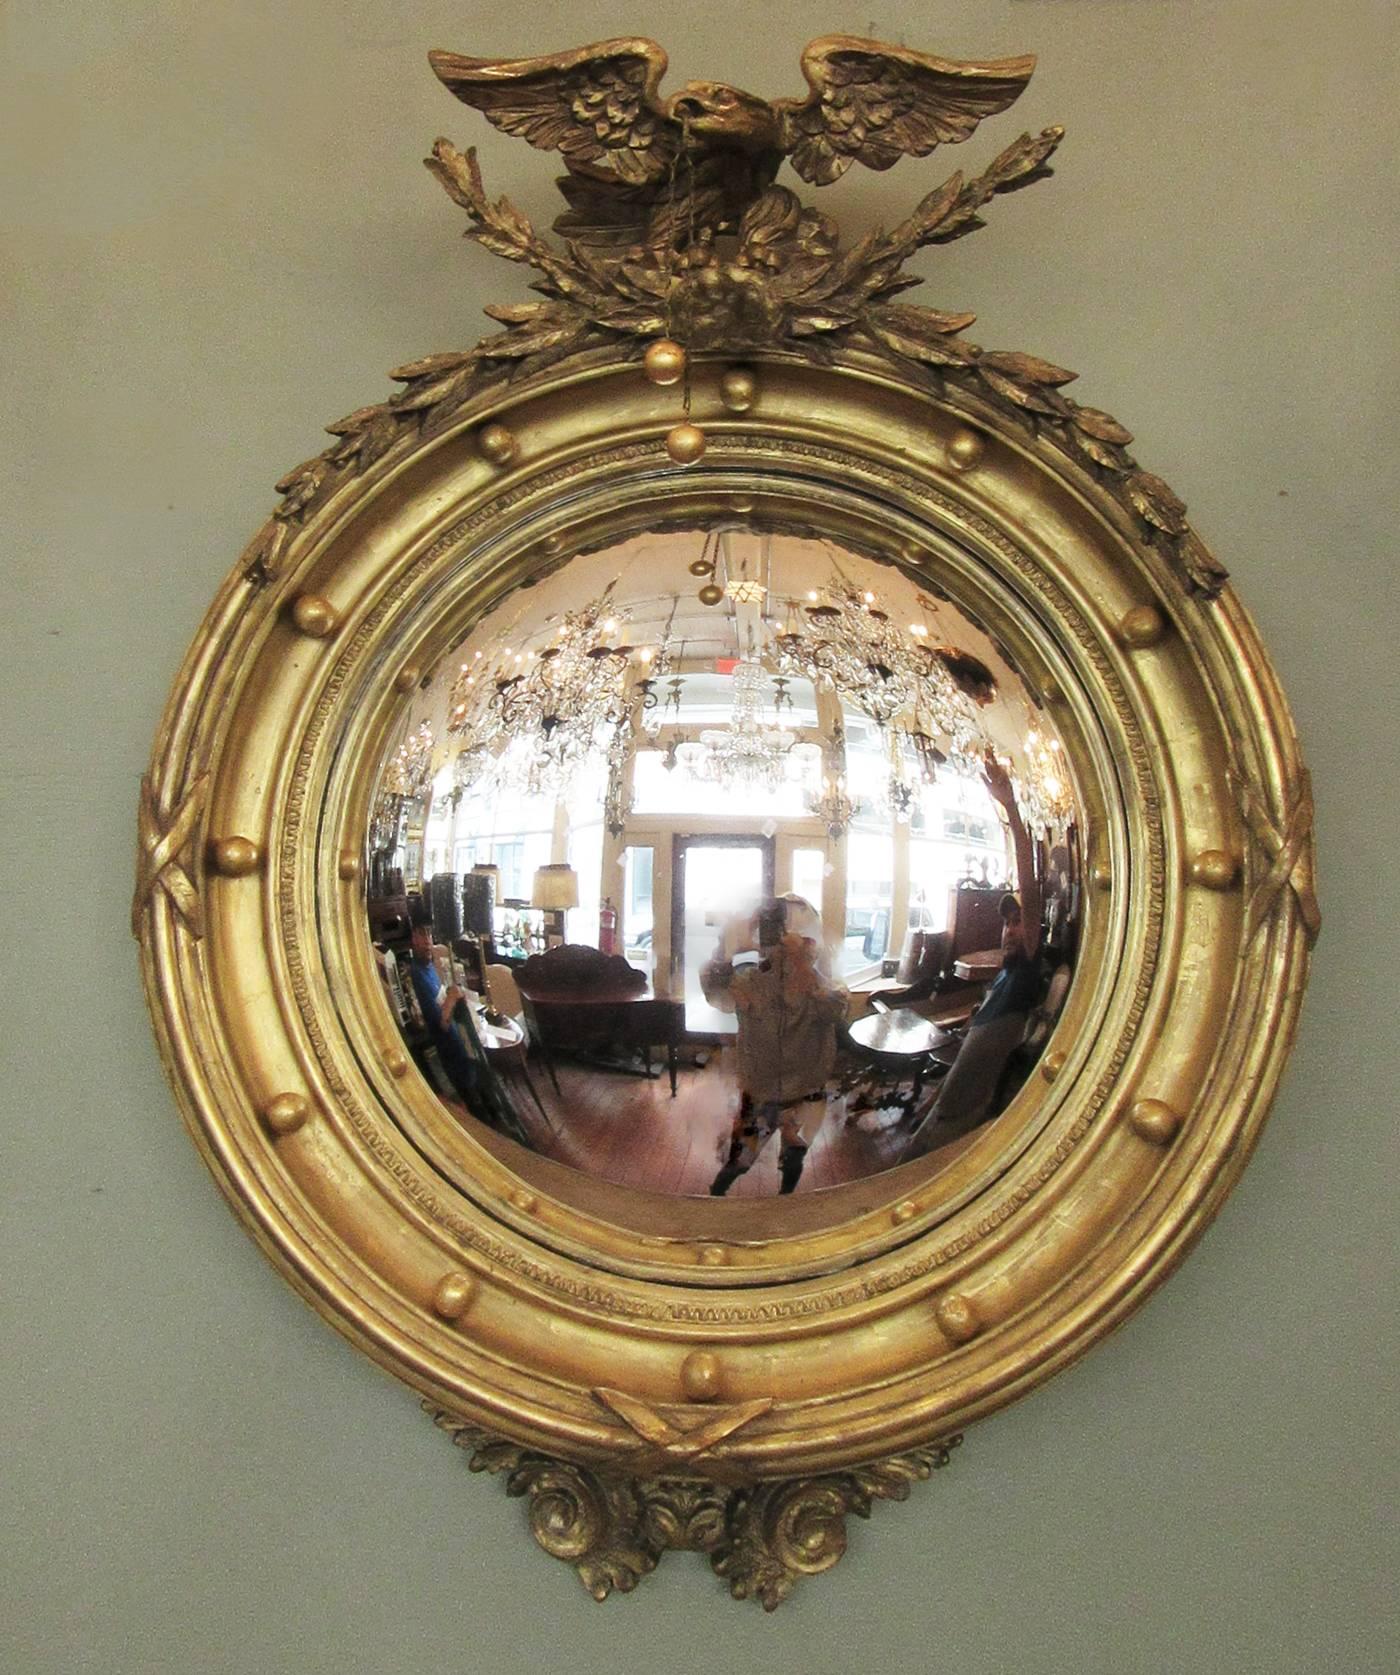 A finely gilded English Regency convex mirror, circa 1815, featuring carvings of displayed eagle with ball tassel and laurel garland.